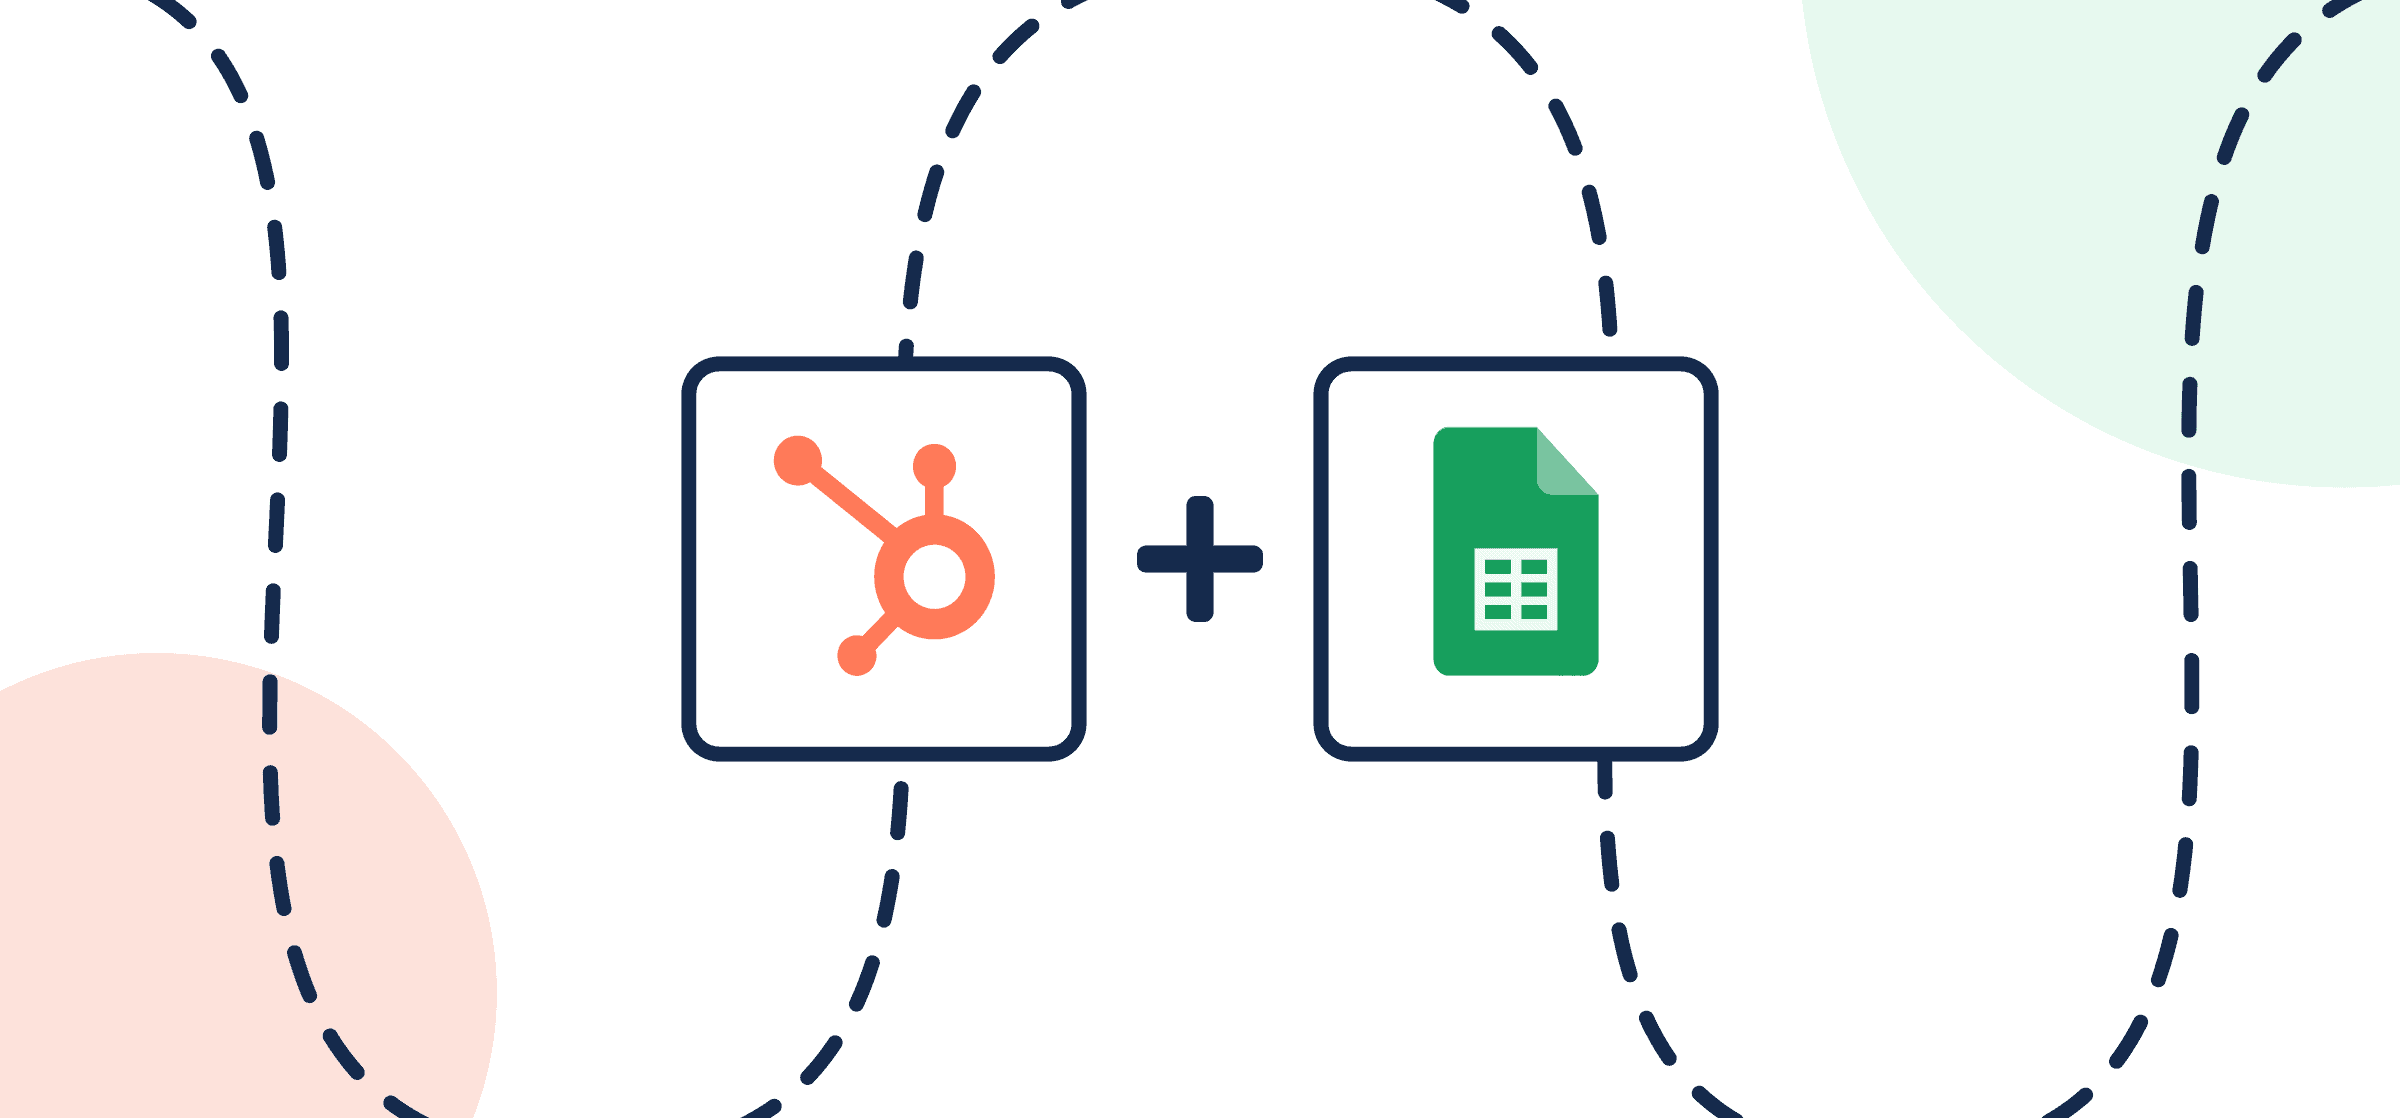 Featured image displaying the logos of HubSpot and Google Sheets in Unito's guide to setting up a simple Two-Way Sync